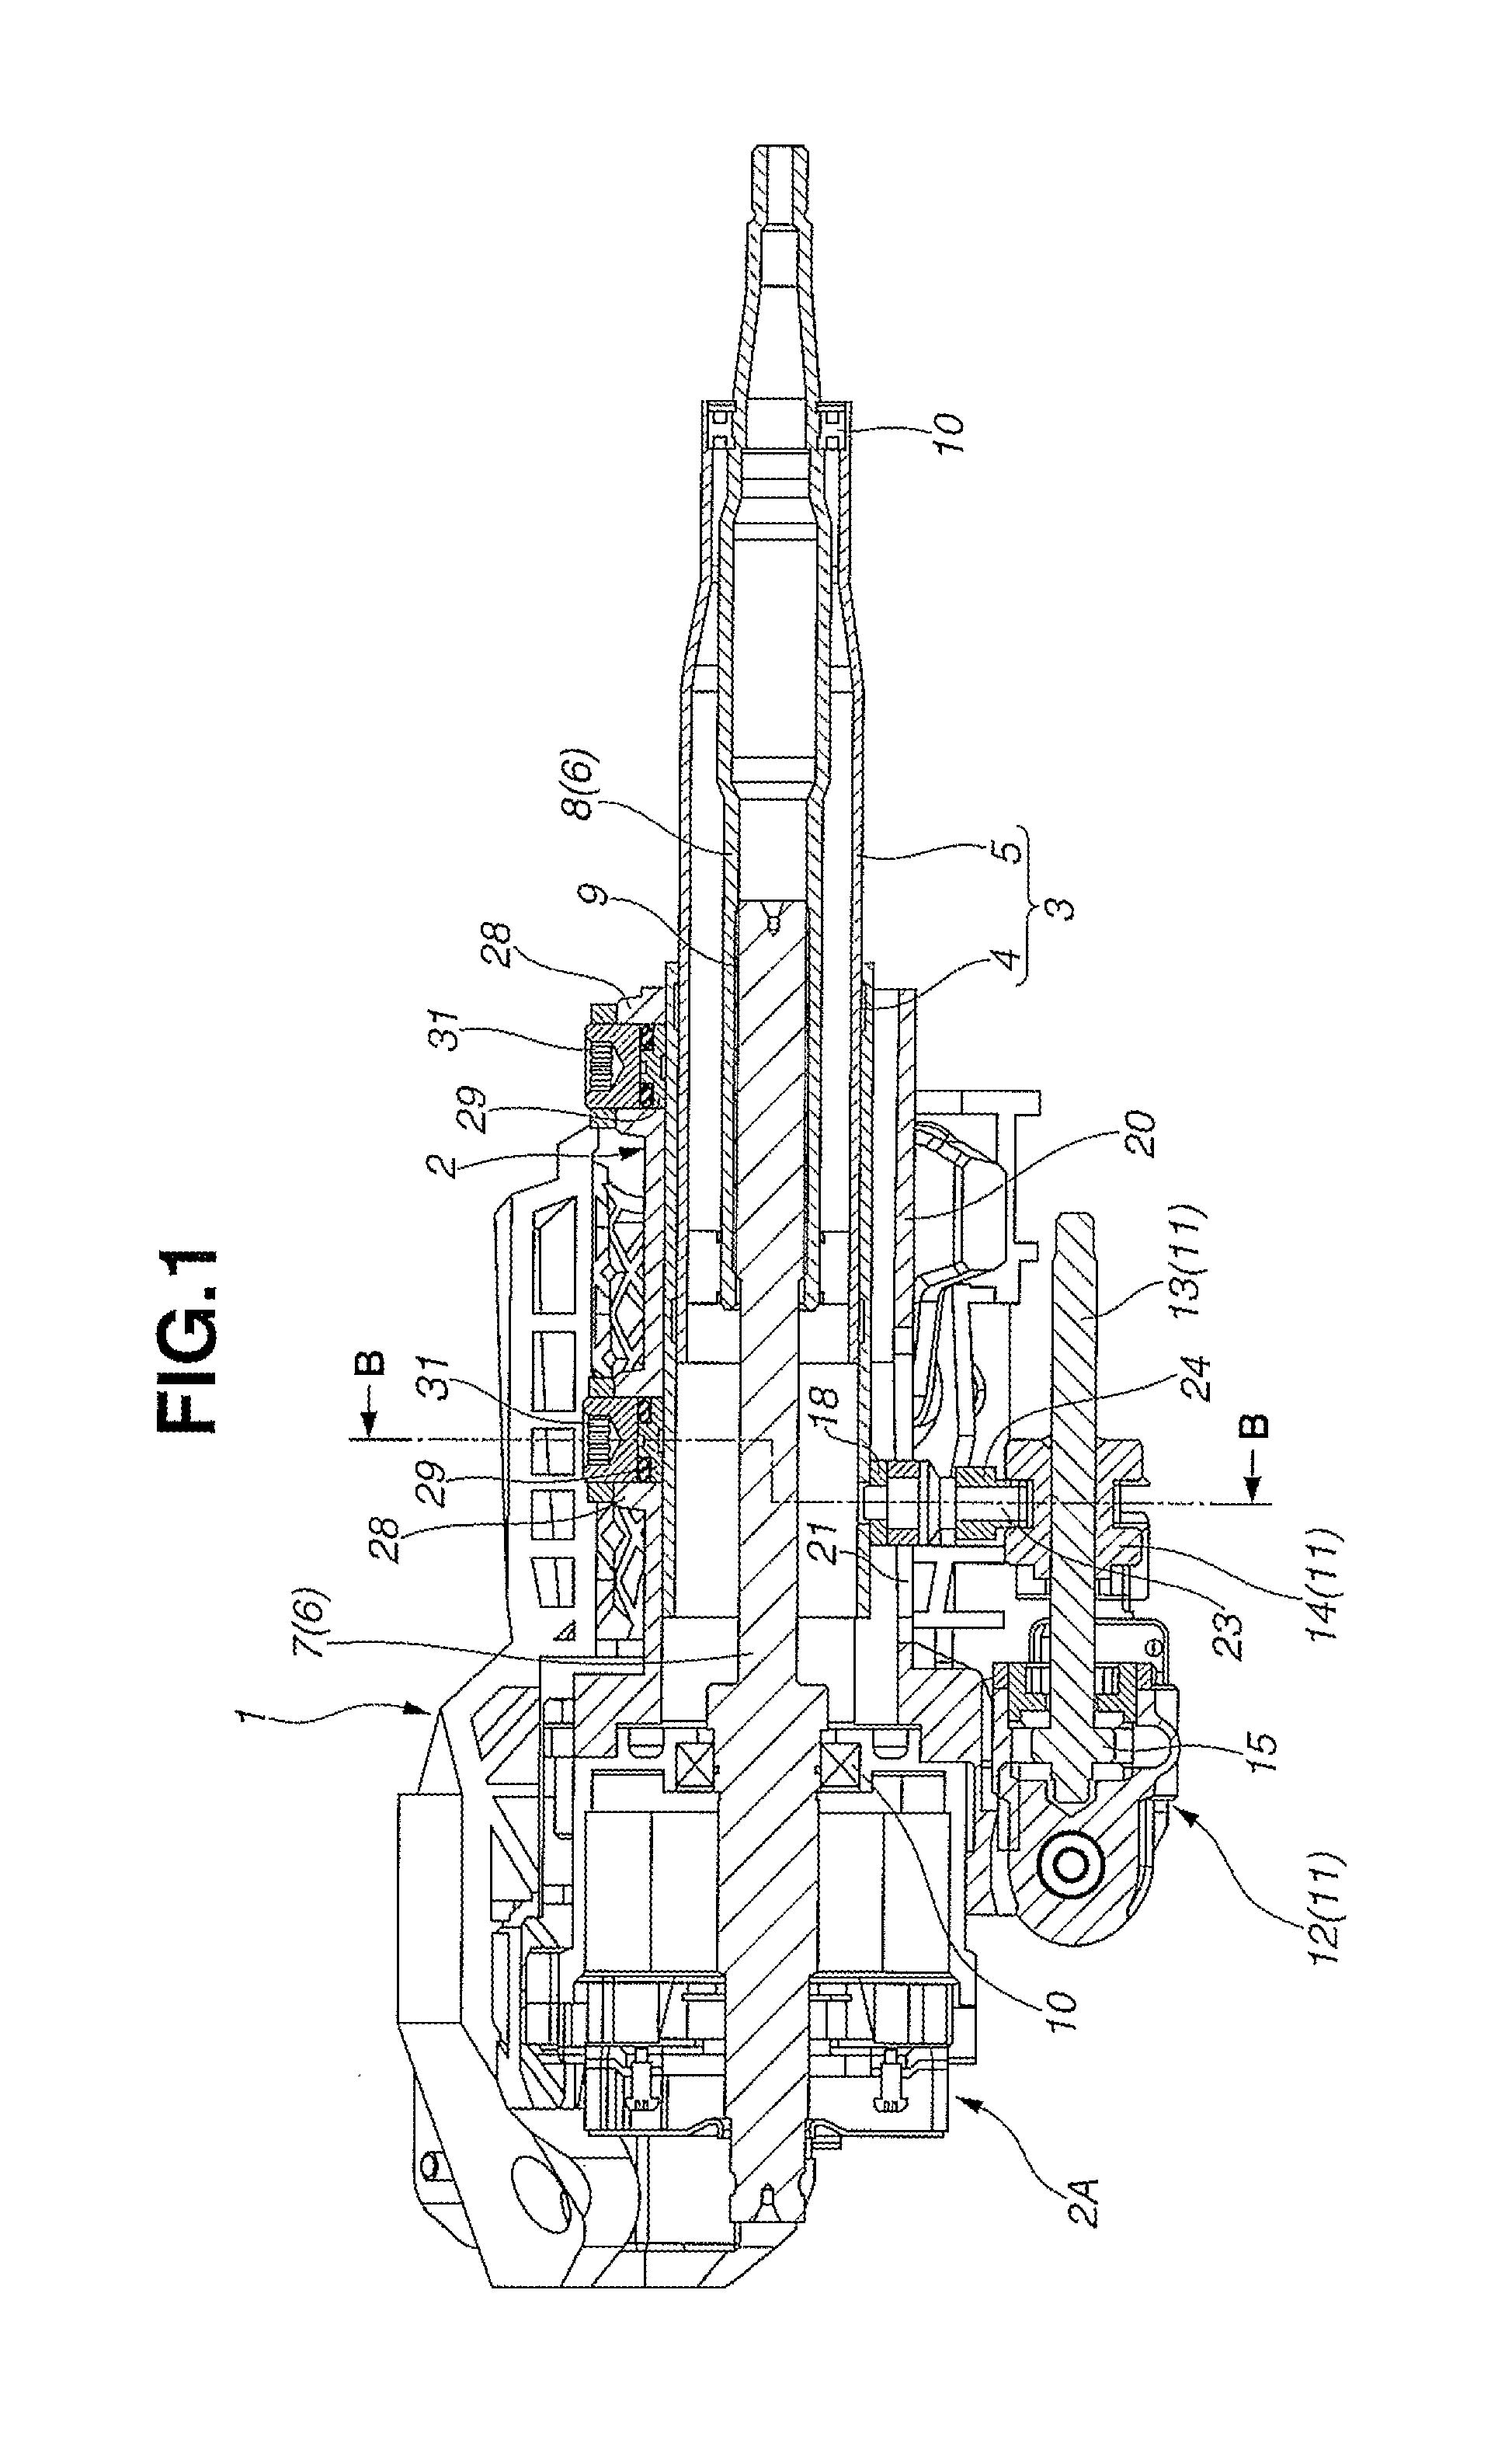 Electrically-driven steering column apparatus